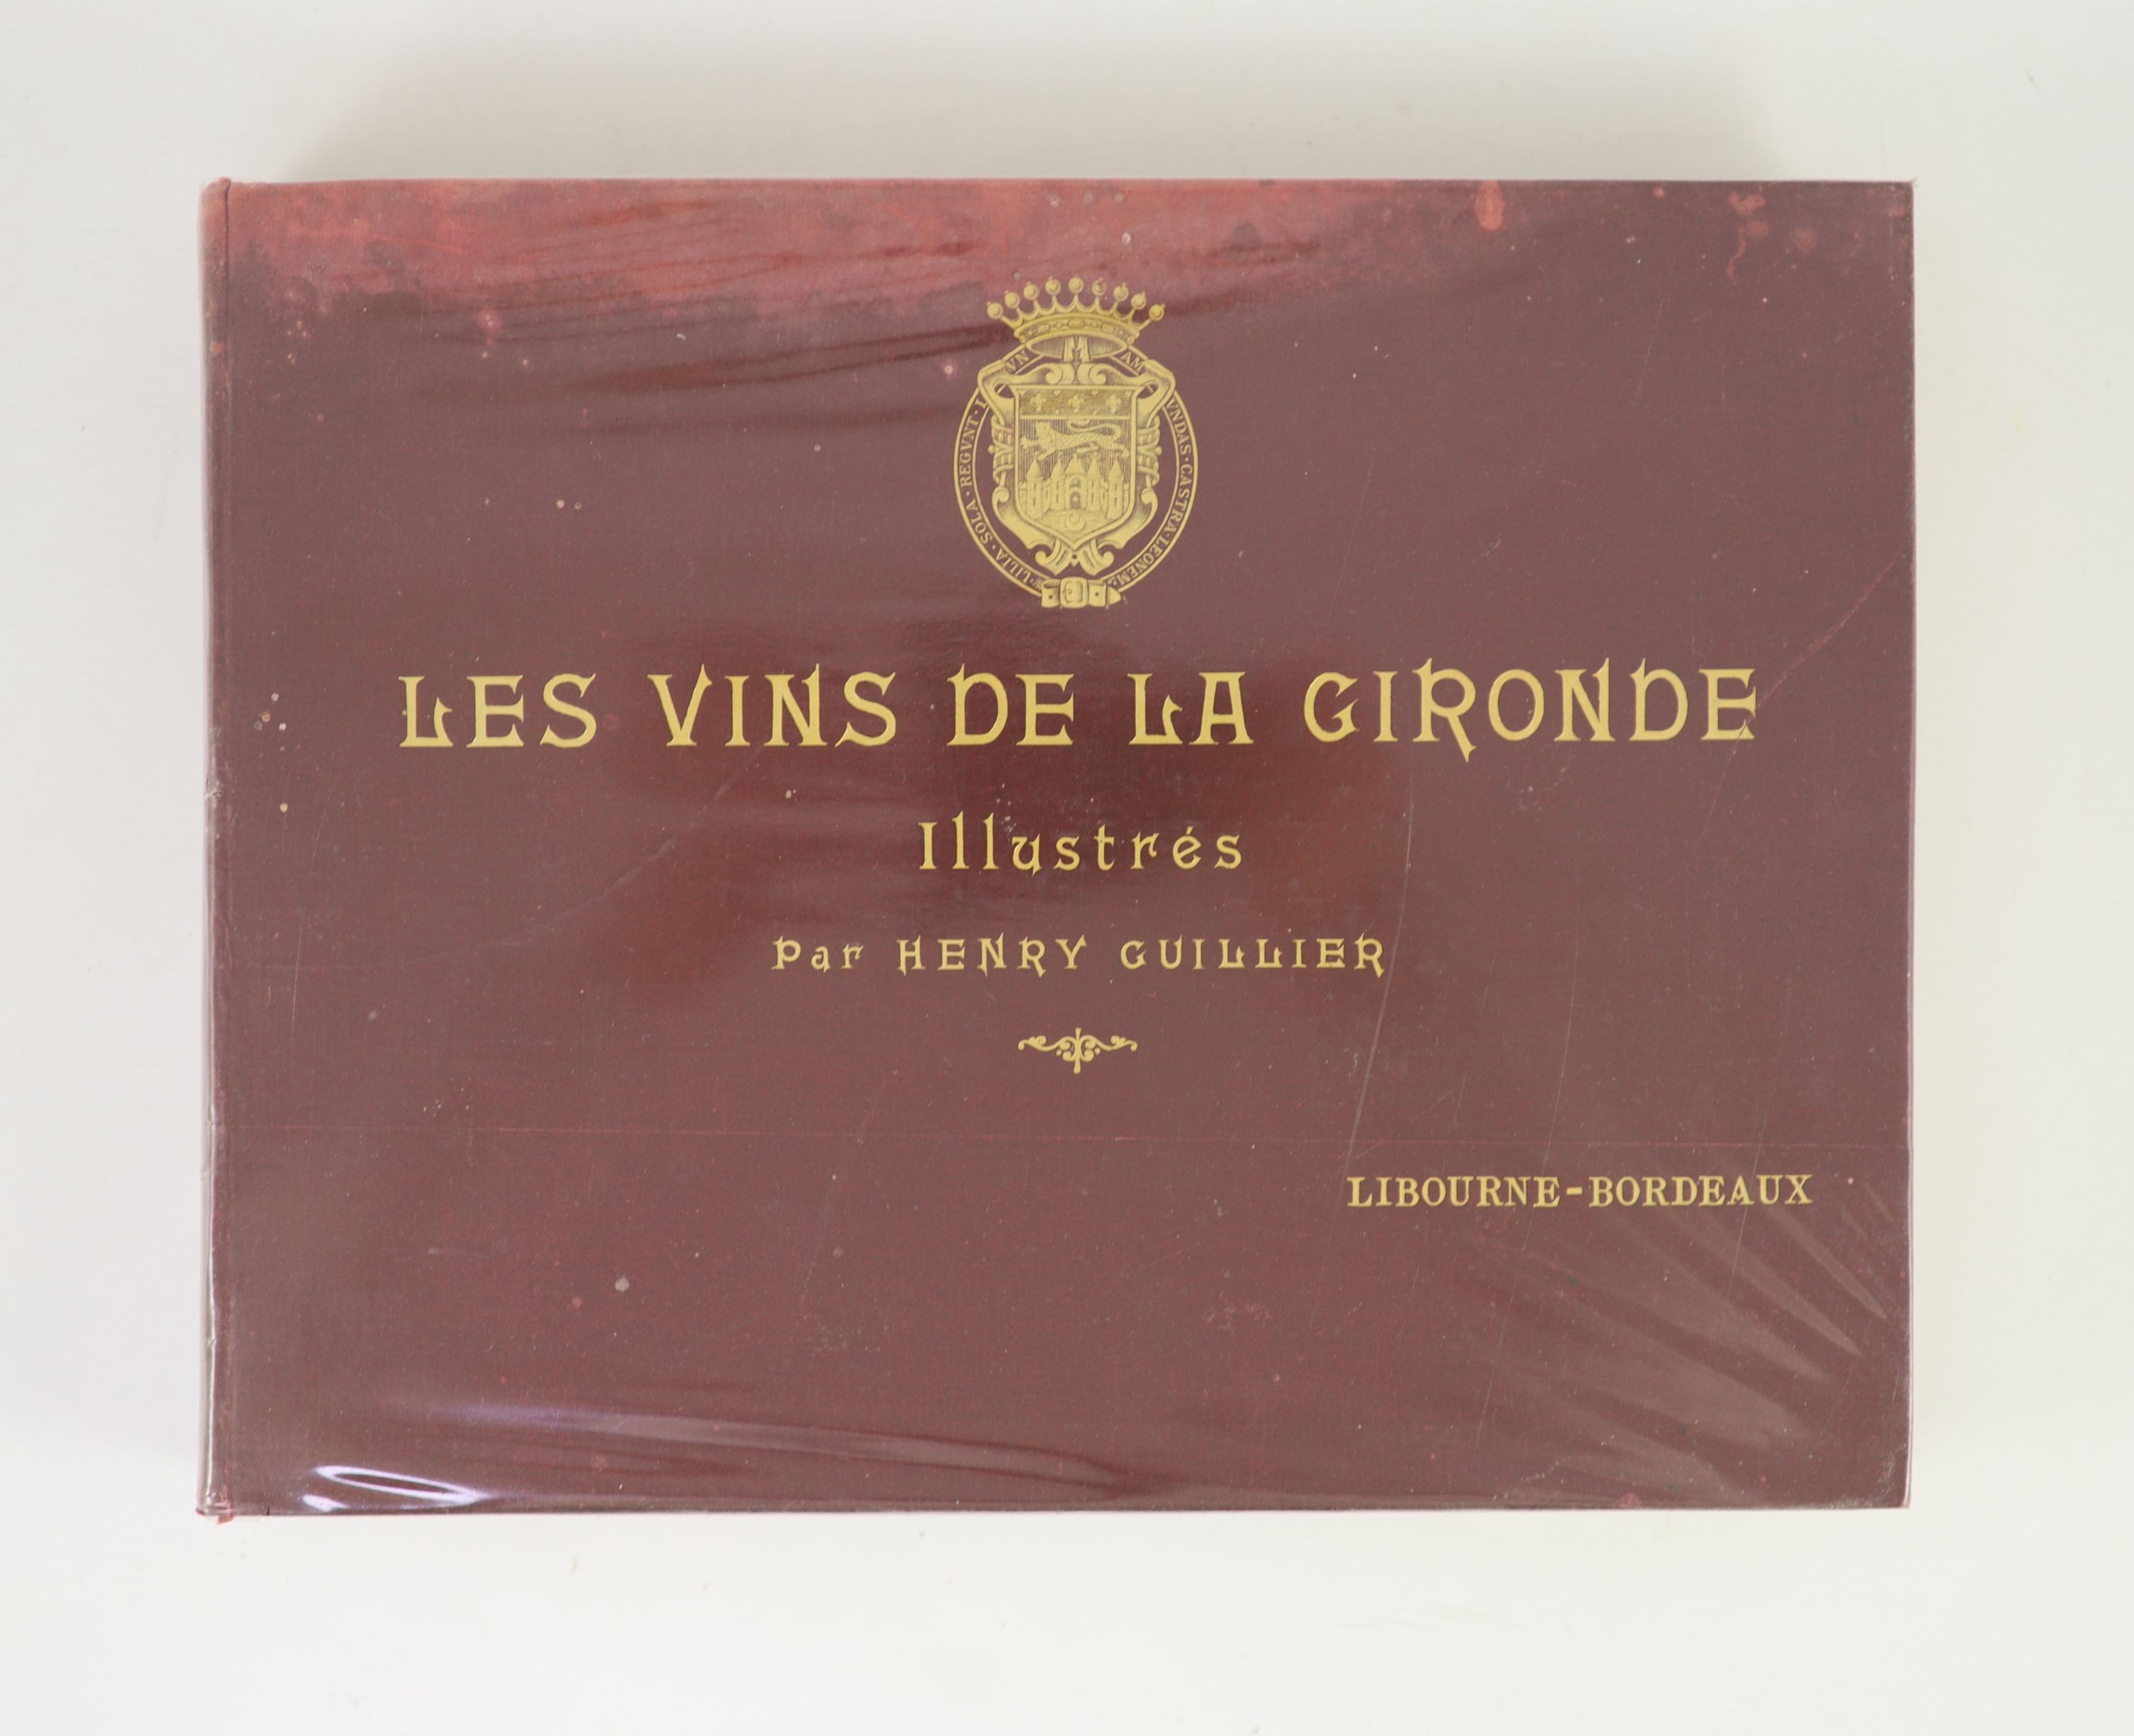 Guillier, Henry. Les Vins de La Gironde par Henry Guillier Libourne Bordeaux. Oblong folio, n.d. (c.1910). Printed photographic title page and 168 printed photographic views of wine chateaus, producers and negotiants in